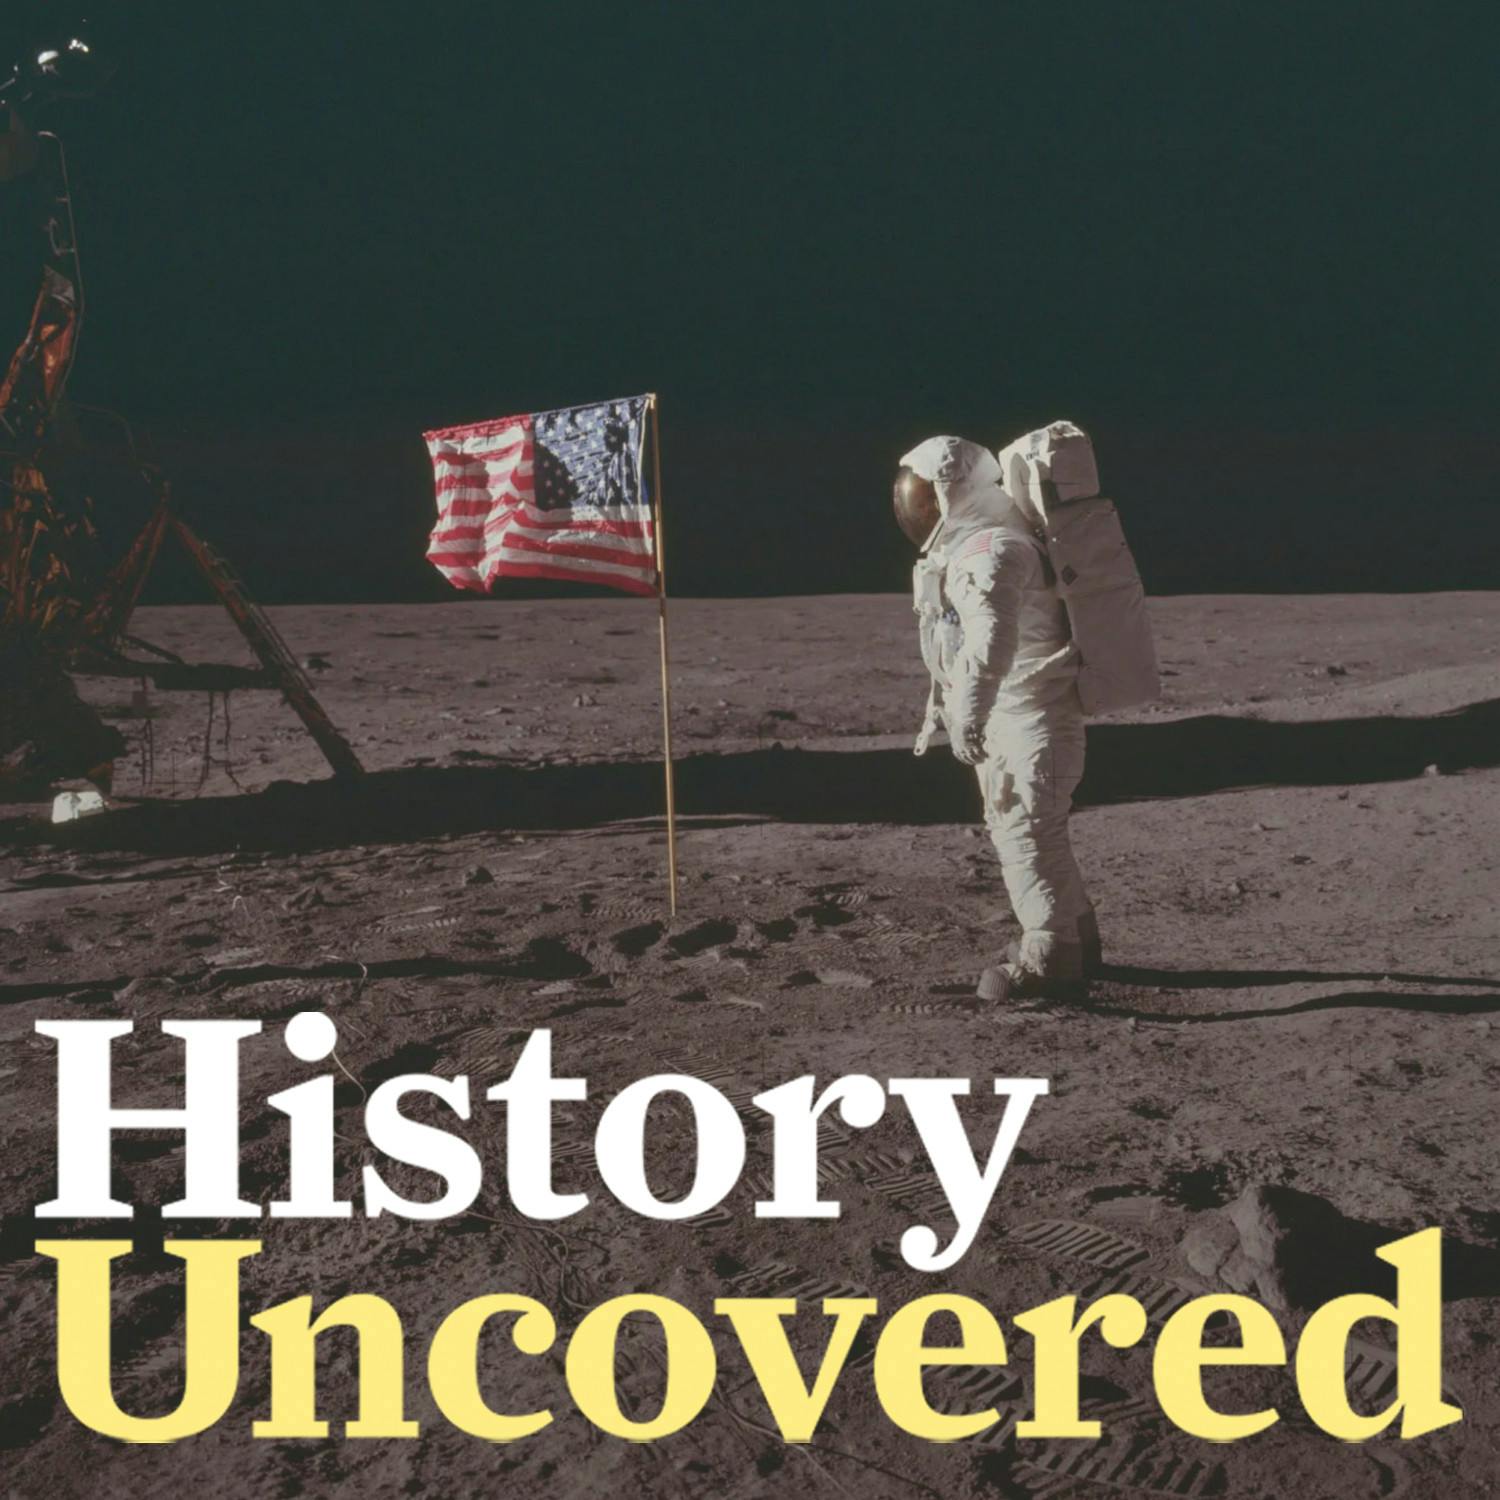 Was The Moon Landing Fake? Inside The Conspiracy Theories